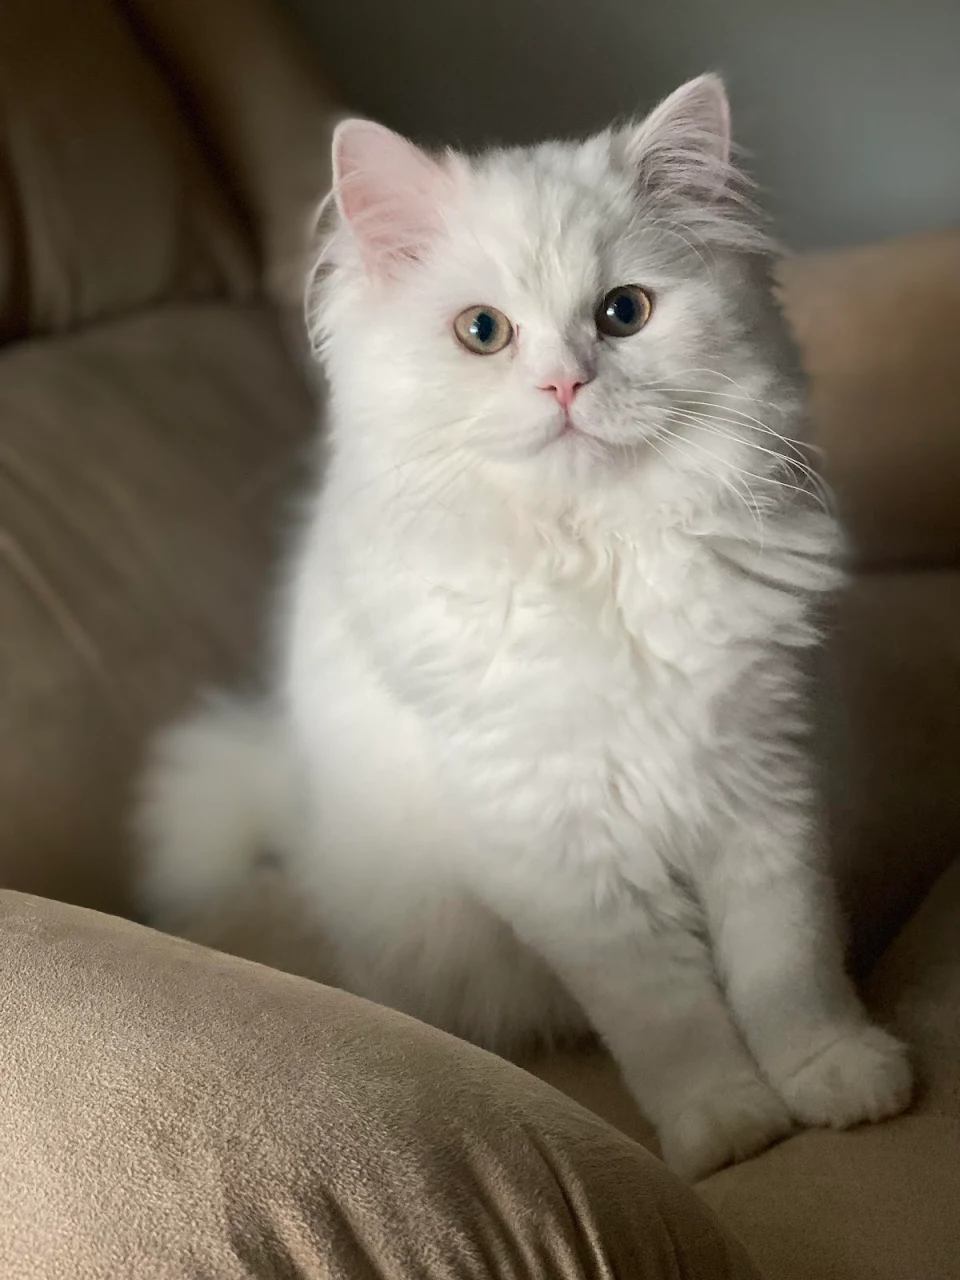 [OC] thx r/aww for helping me name “puff”